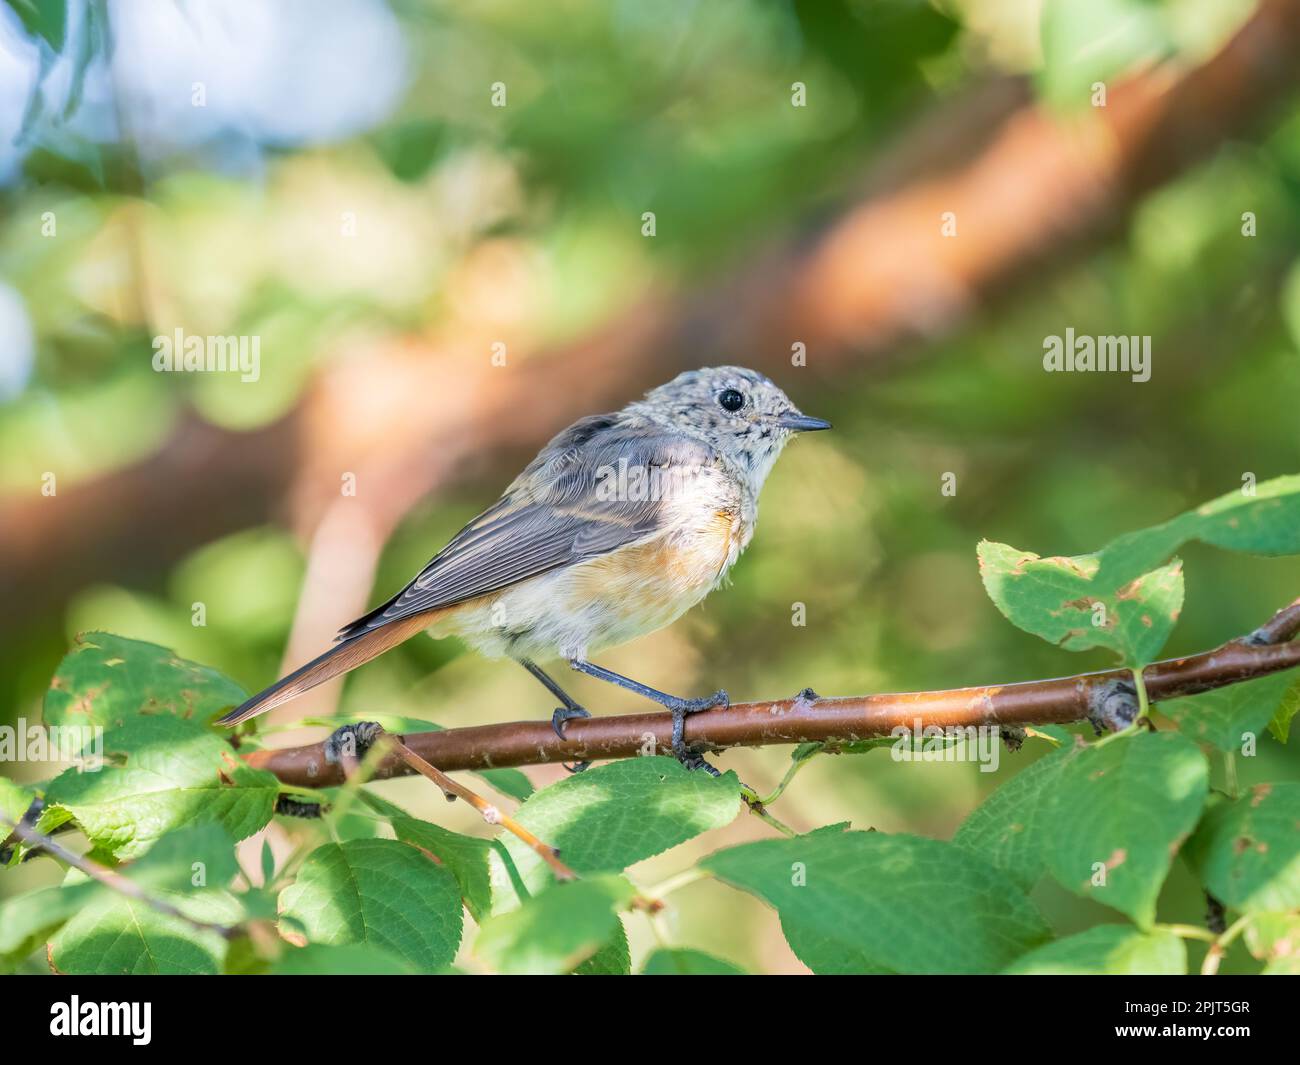 The common redstart, Phoenicurus phoenicurus, young bird, is photographed in close-up sitting on a branch against a blurred background. Soft evening l Stock Photo